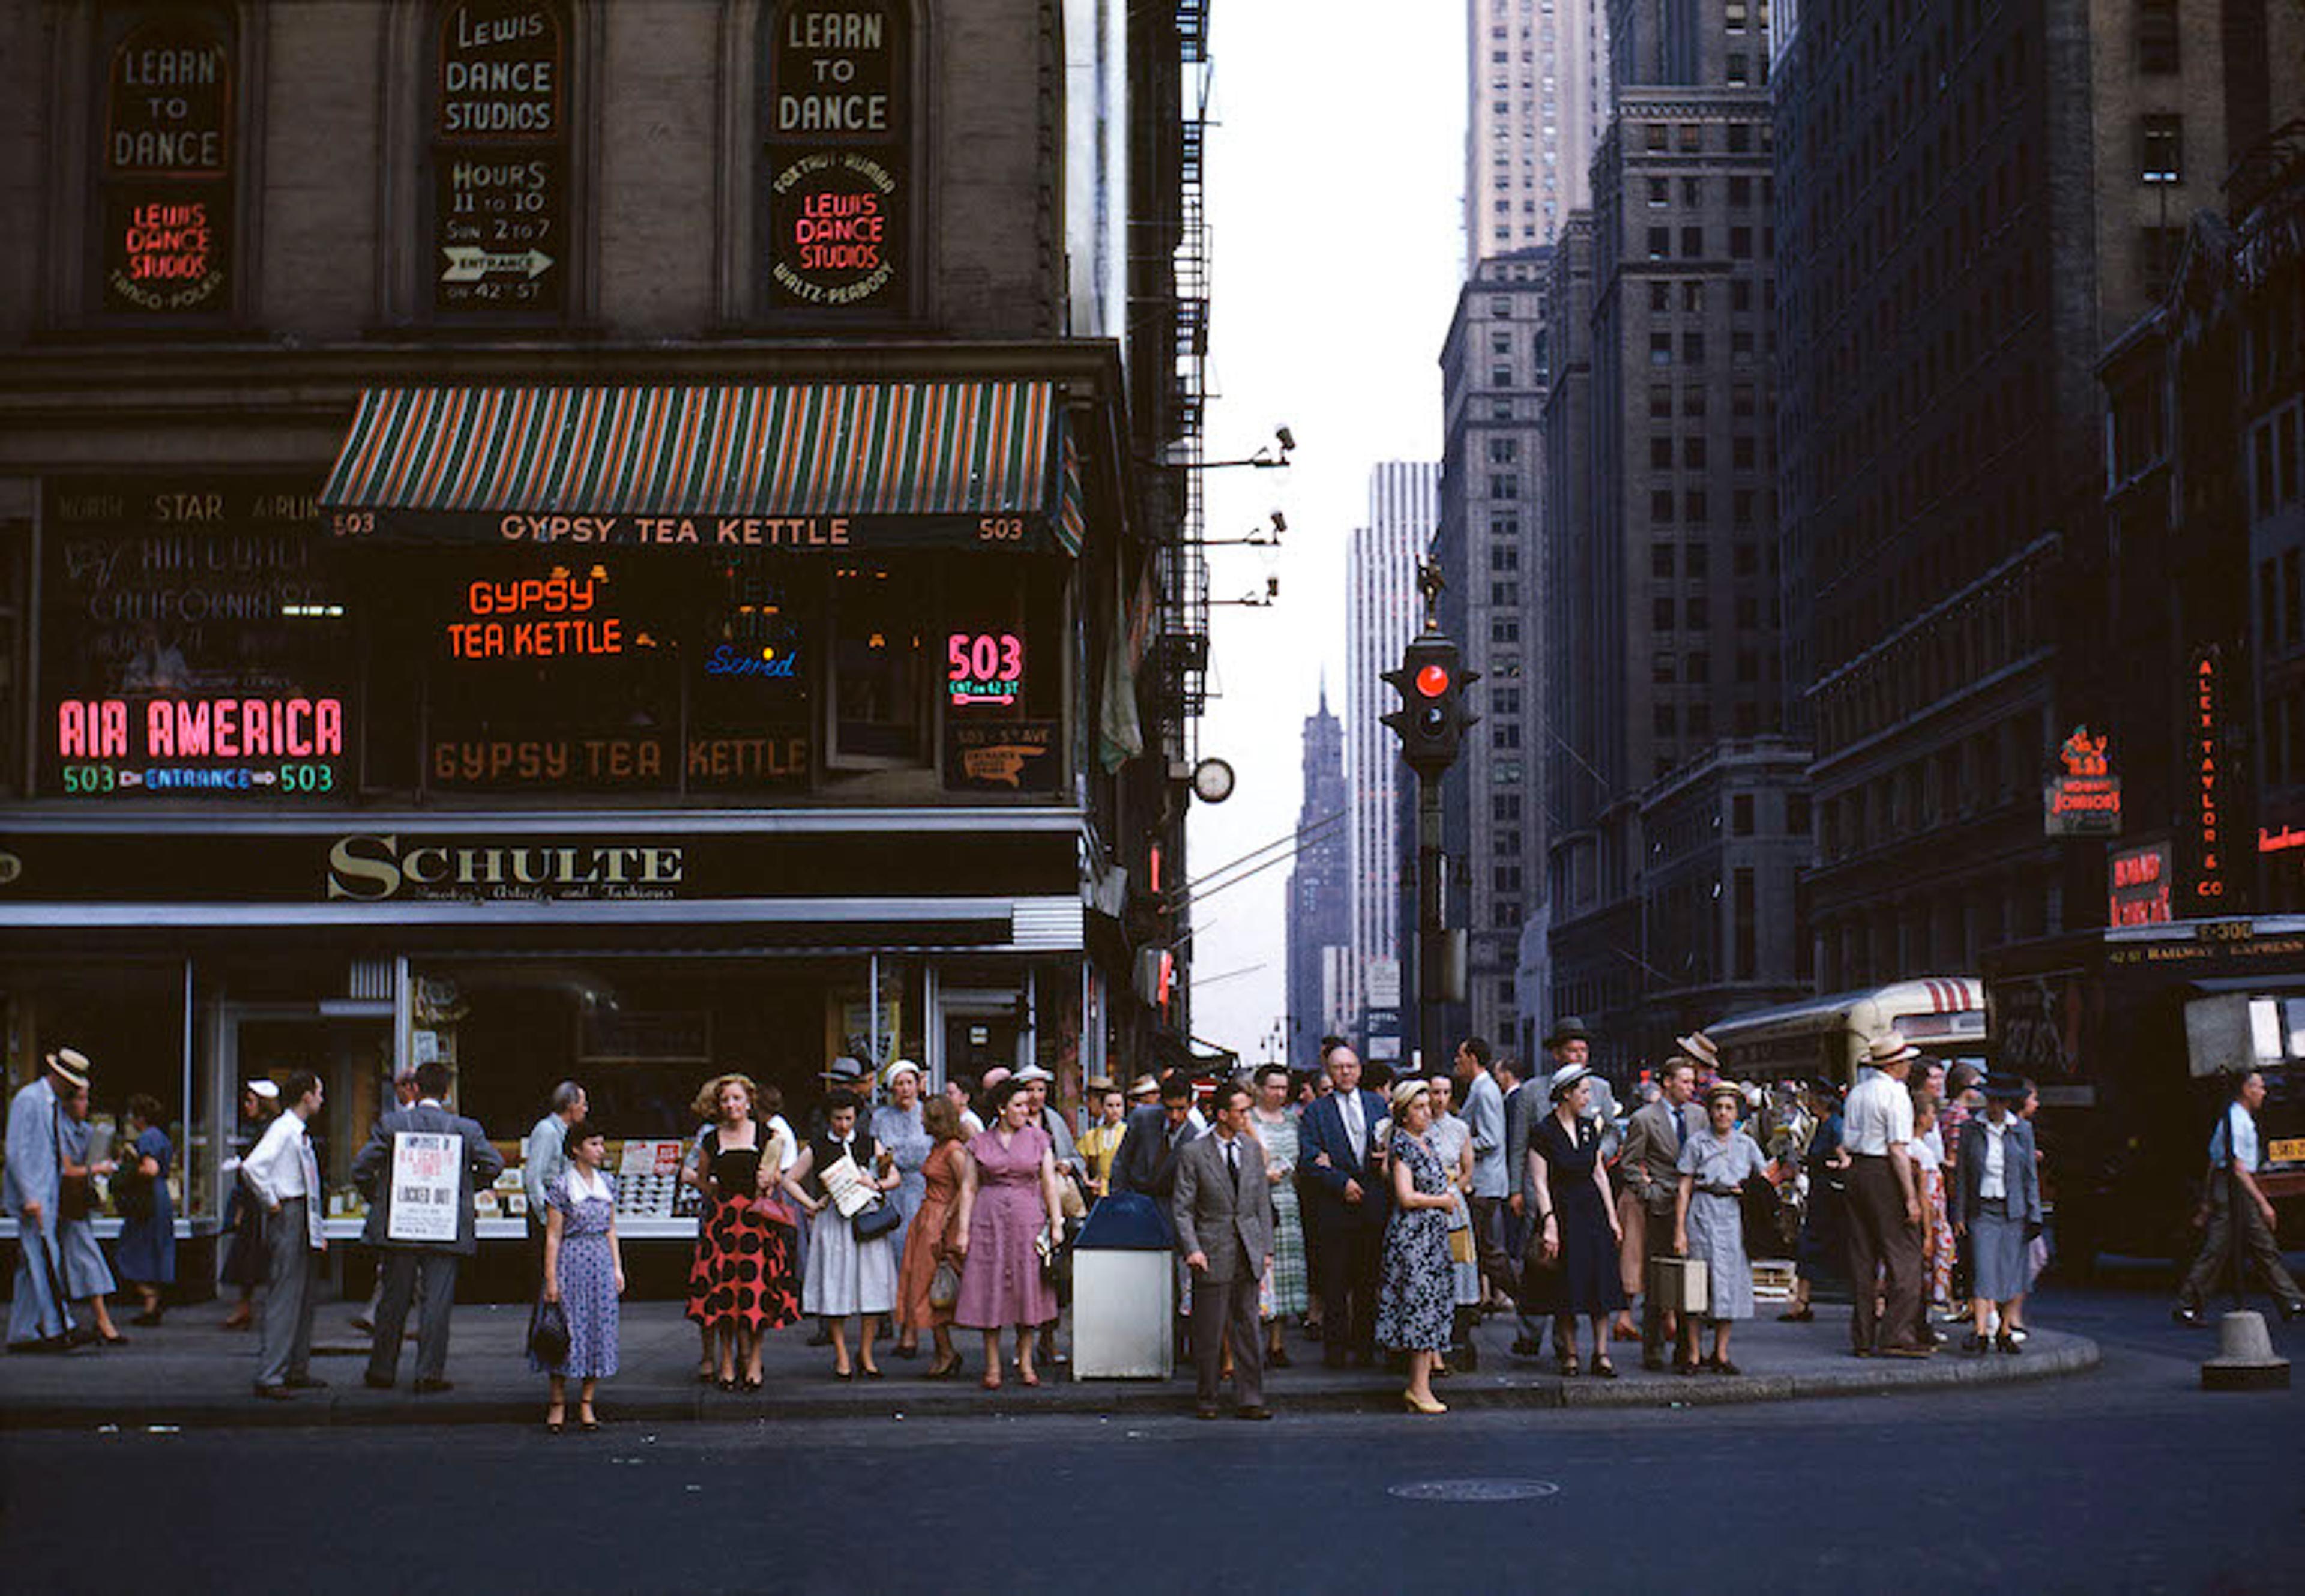 A photograph of a crowd of people standing on a sidewalk on Sixth Avenue in New York City